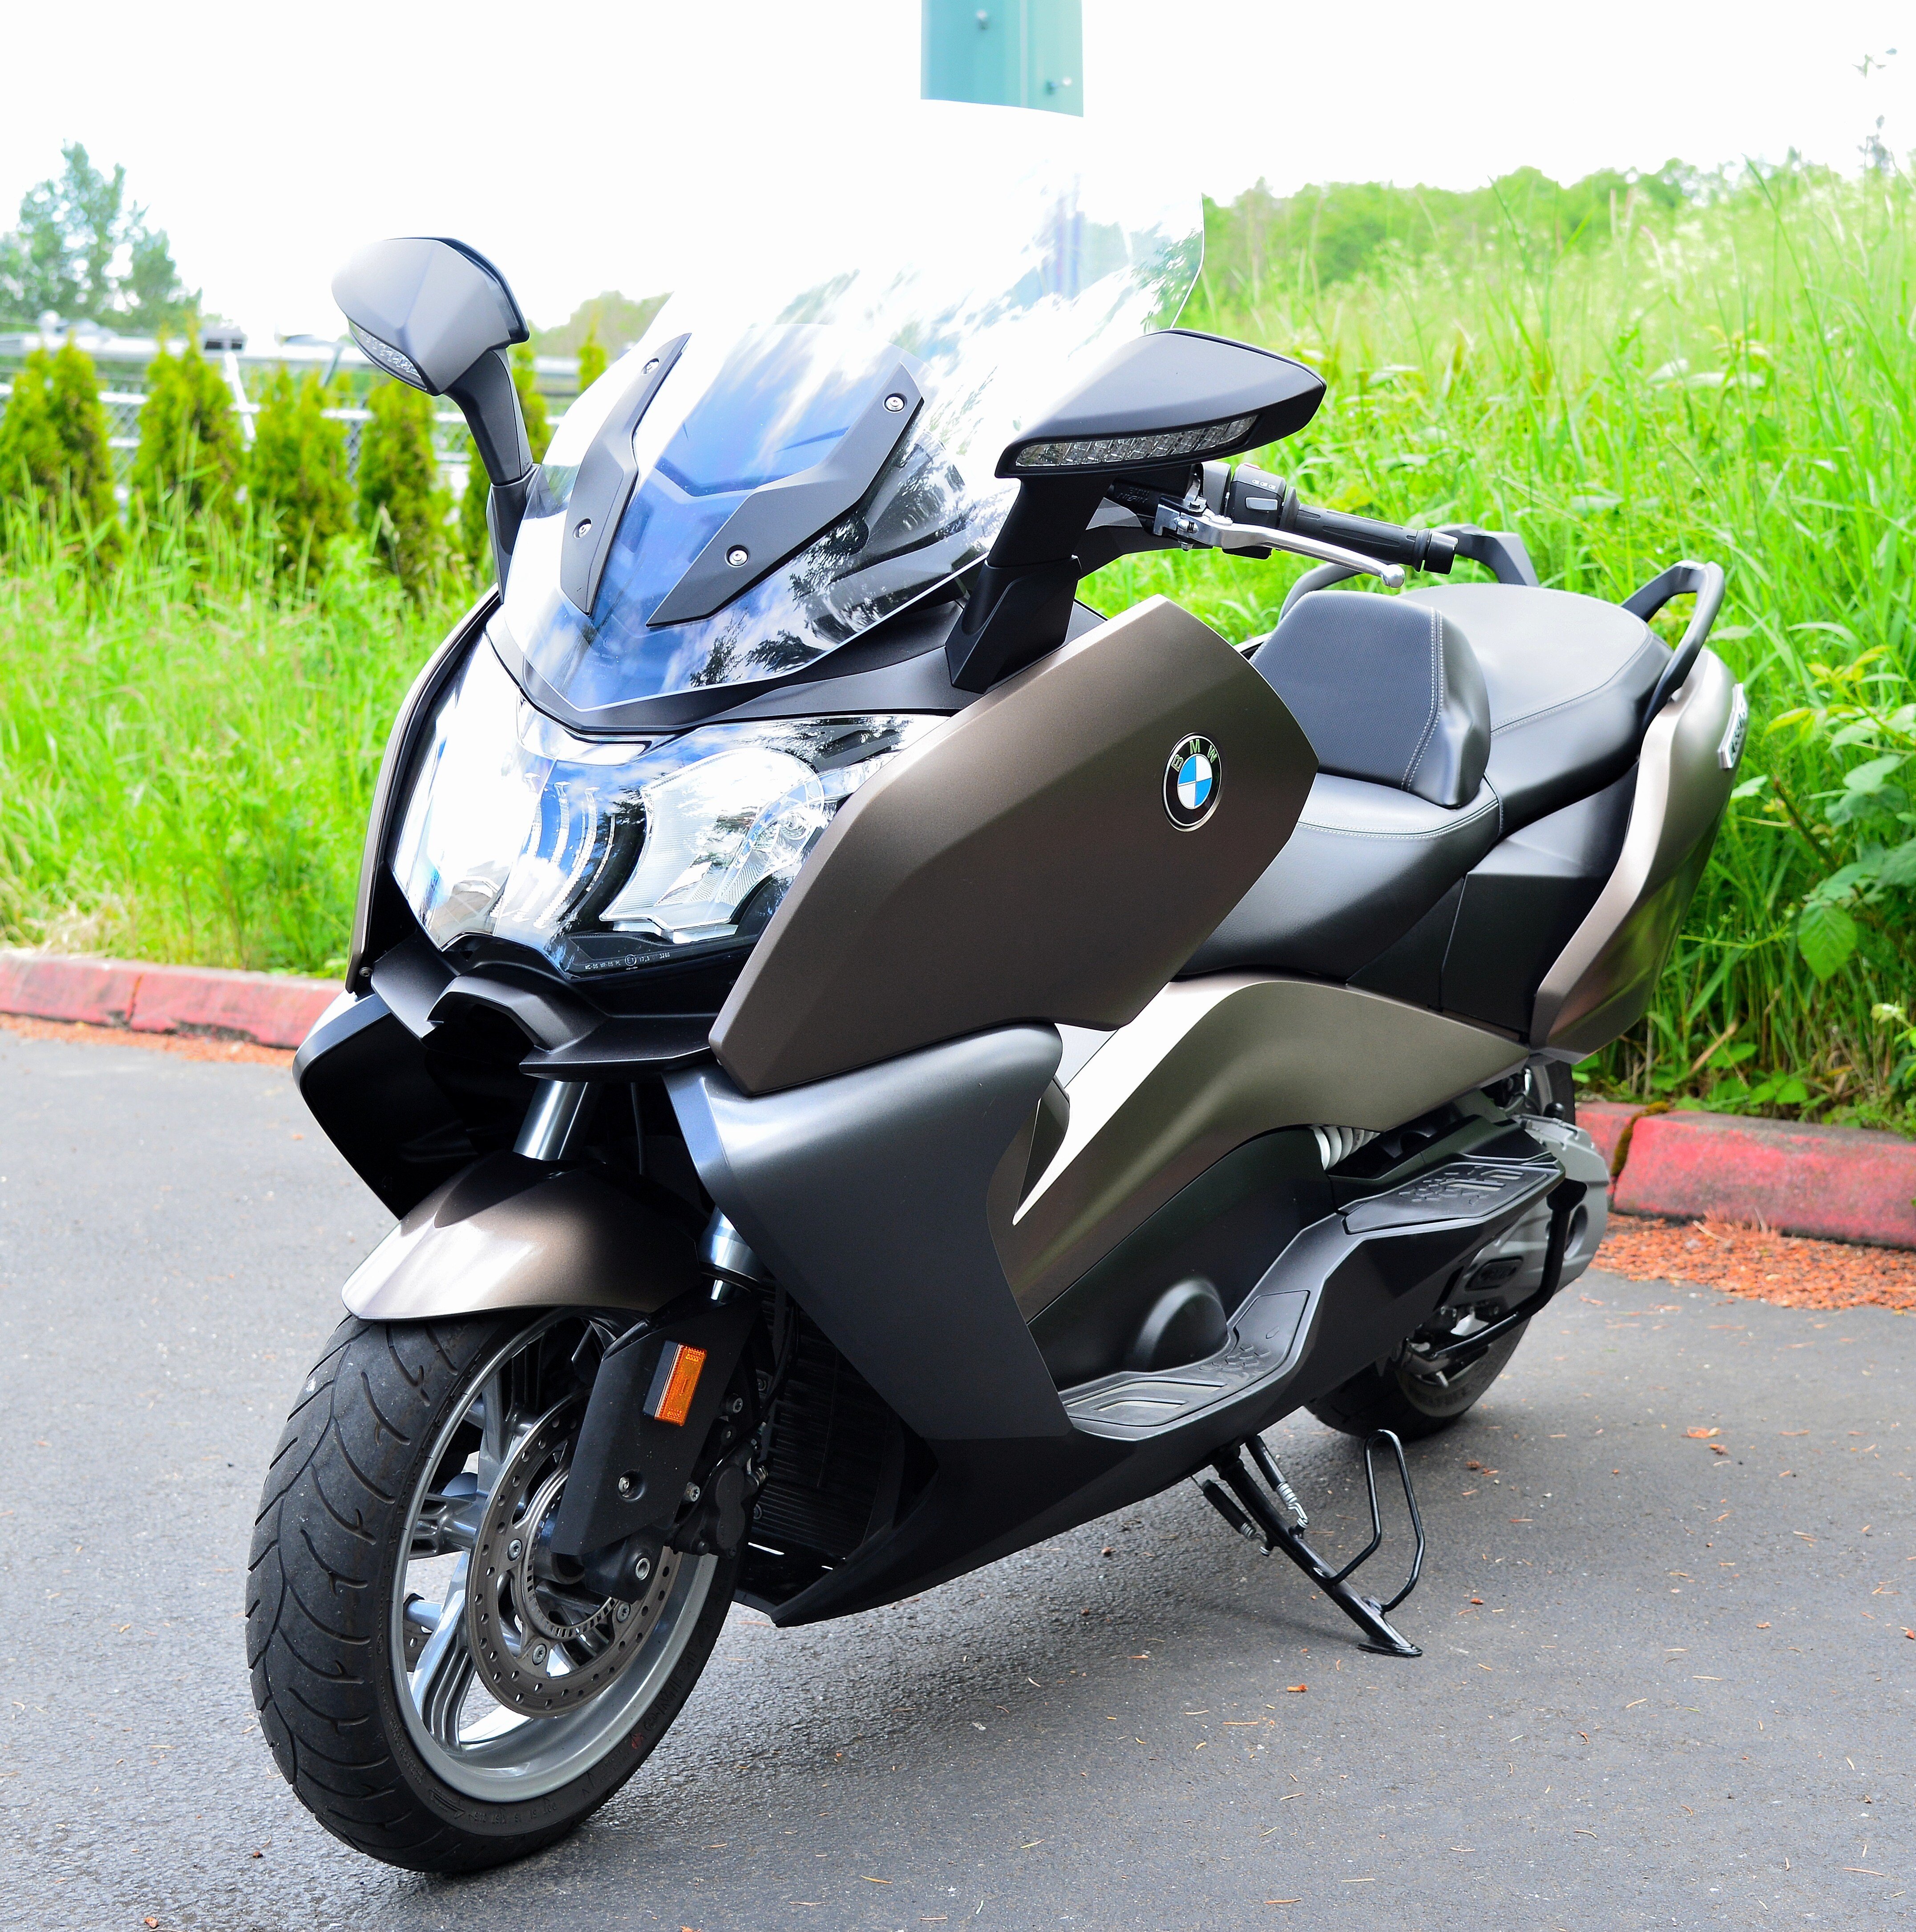 BMW Motorcycles for Sale near Seattle, Washington - Motorcycles on